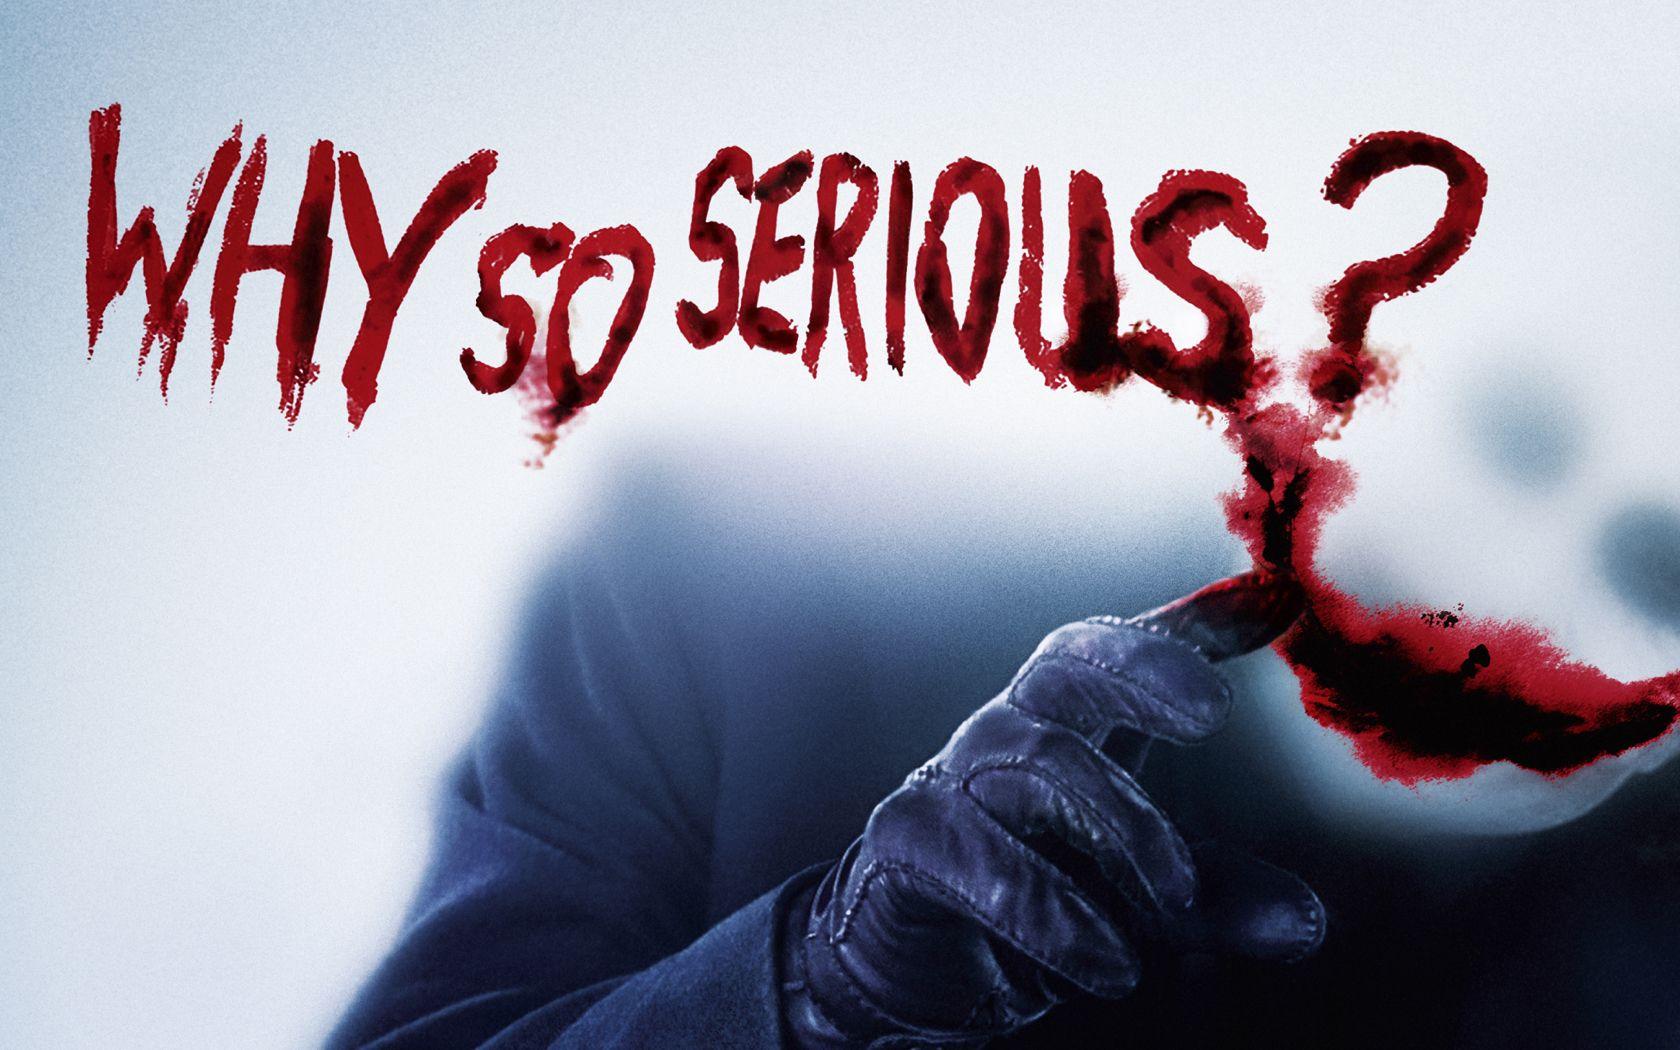 why so serious? Wallpaper Background